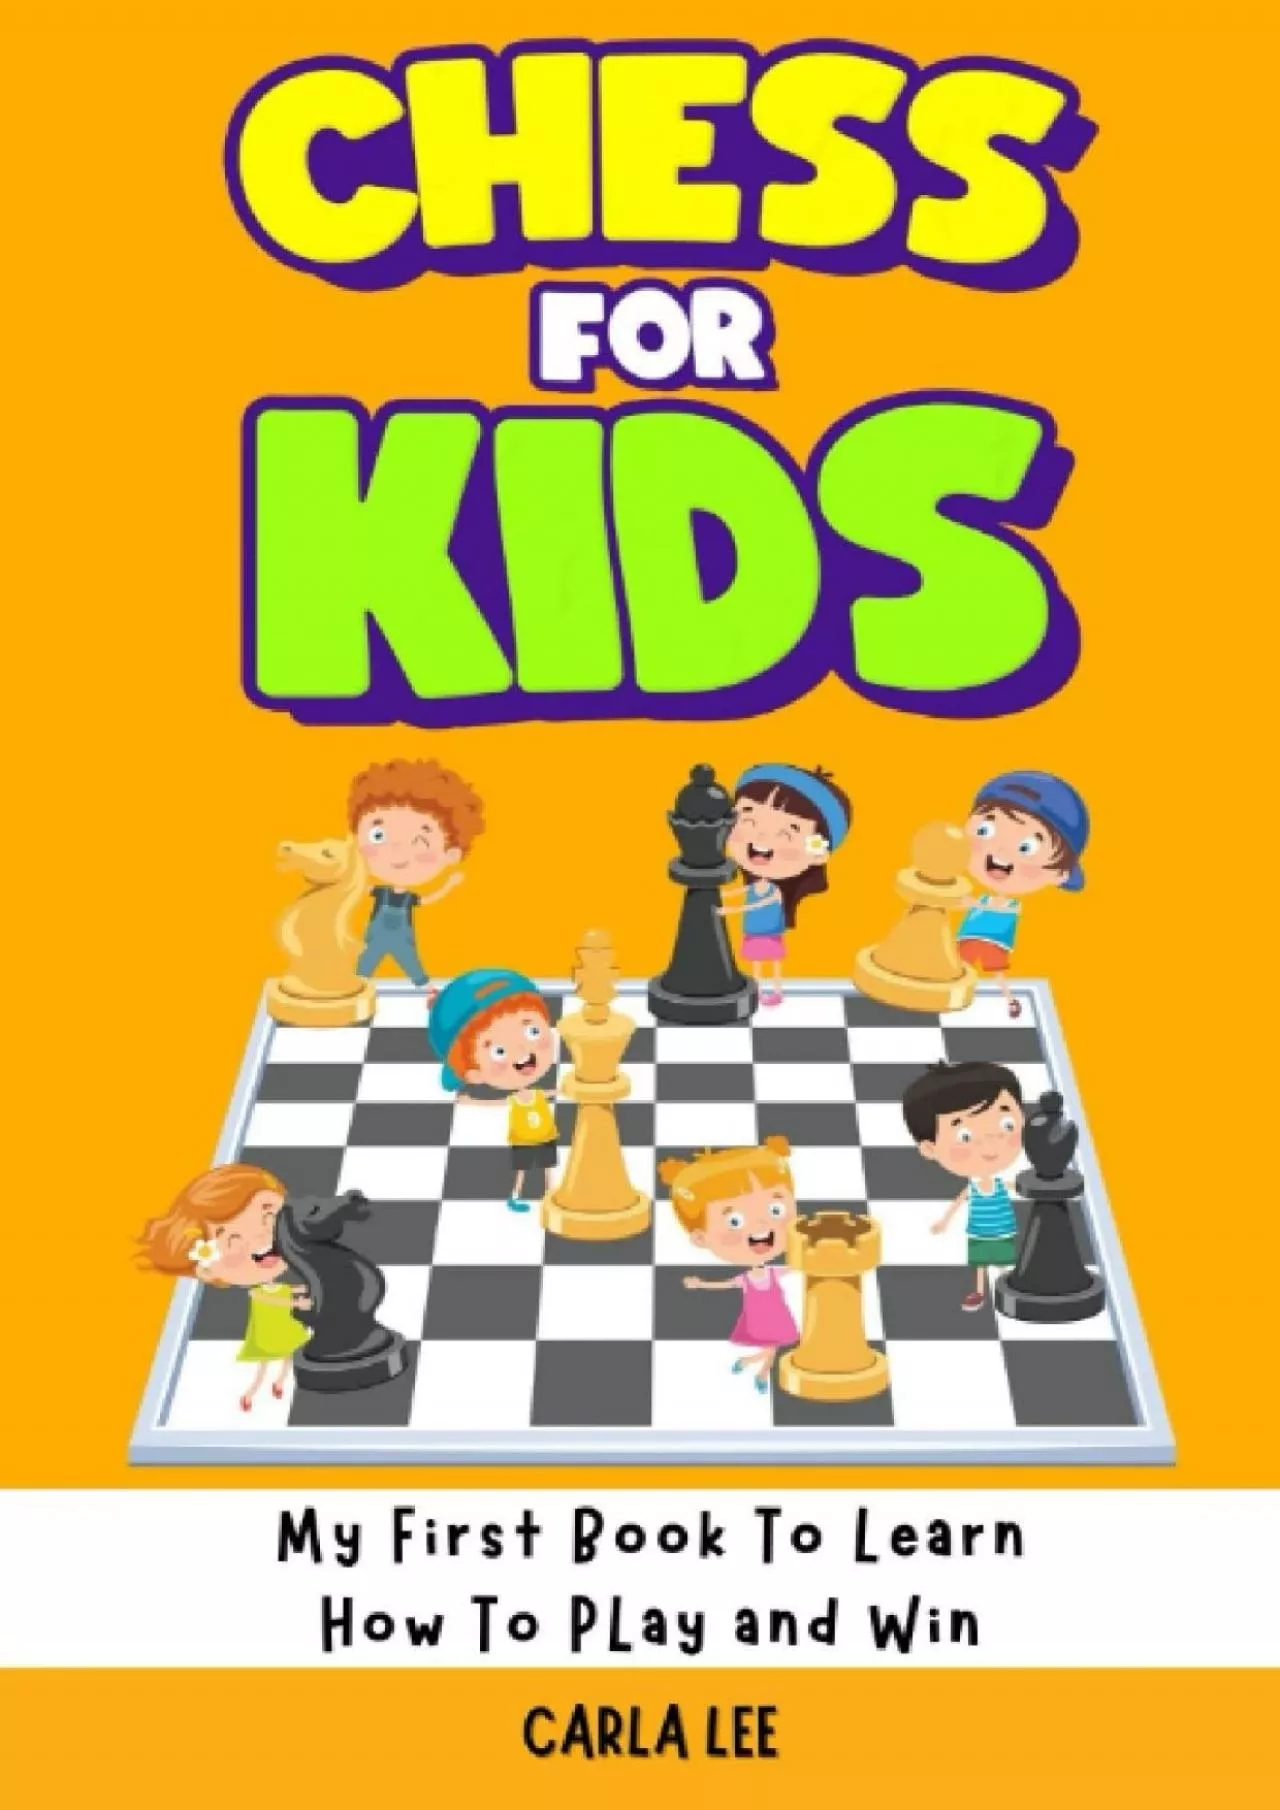 [DOWNLOAD] Chess For Kids: My First Book To Learn How To Play and Win: Rules, Strategies